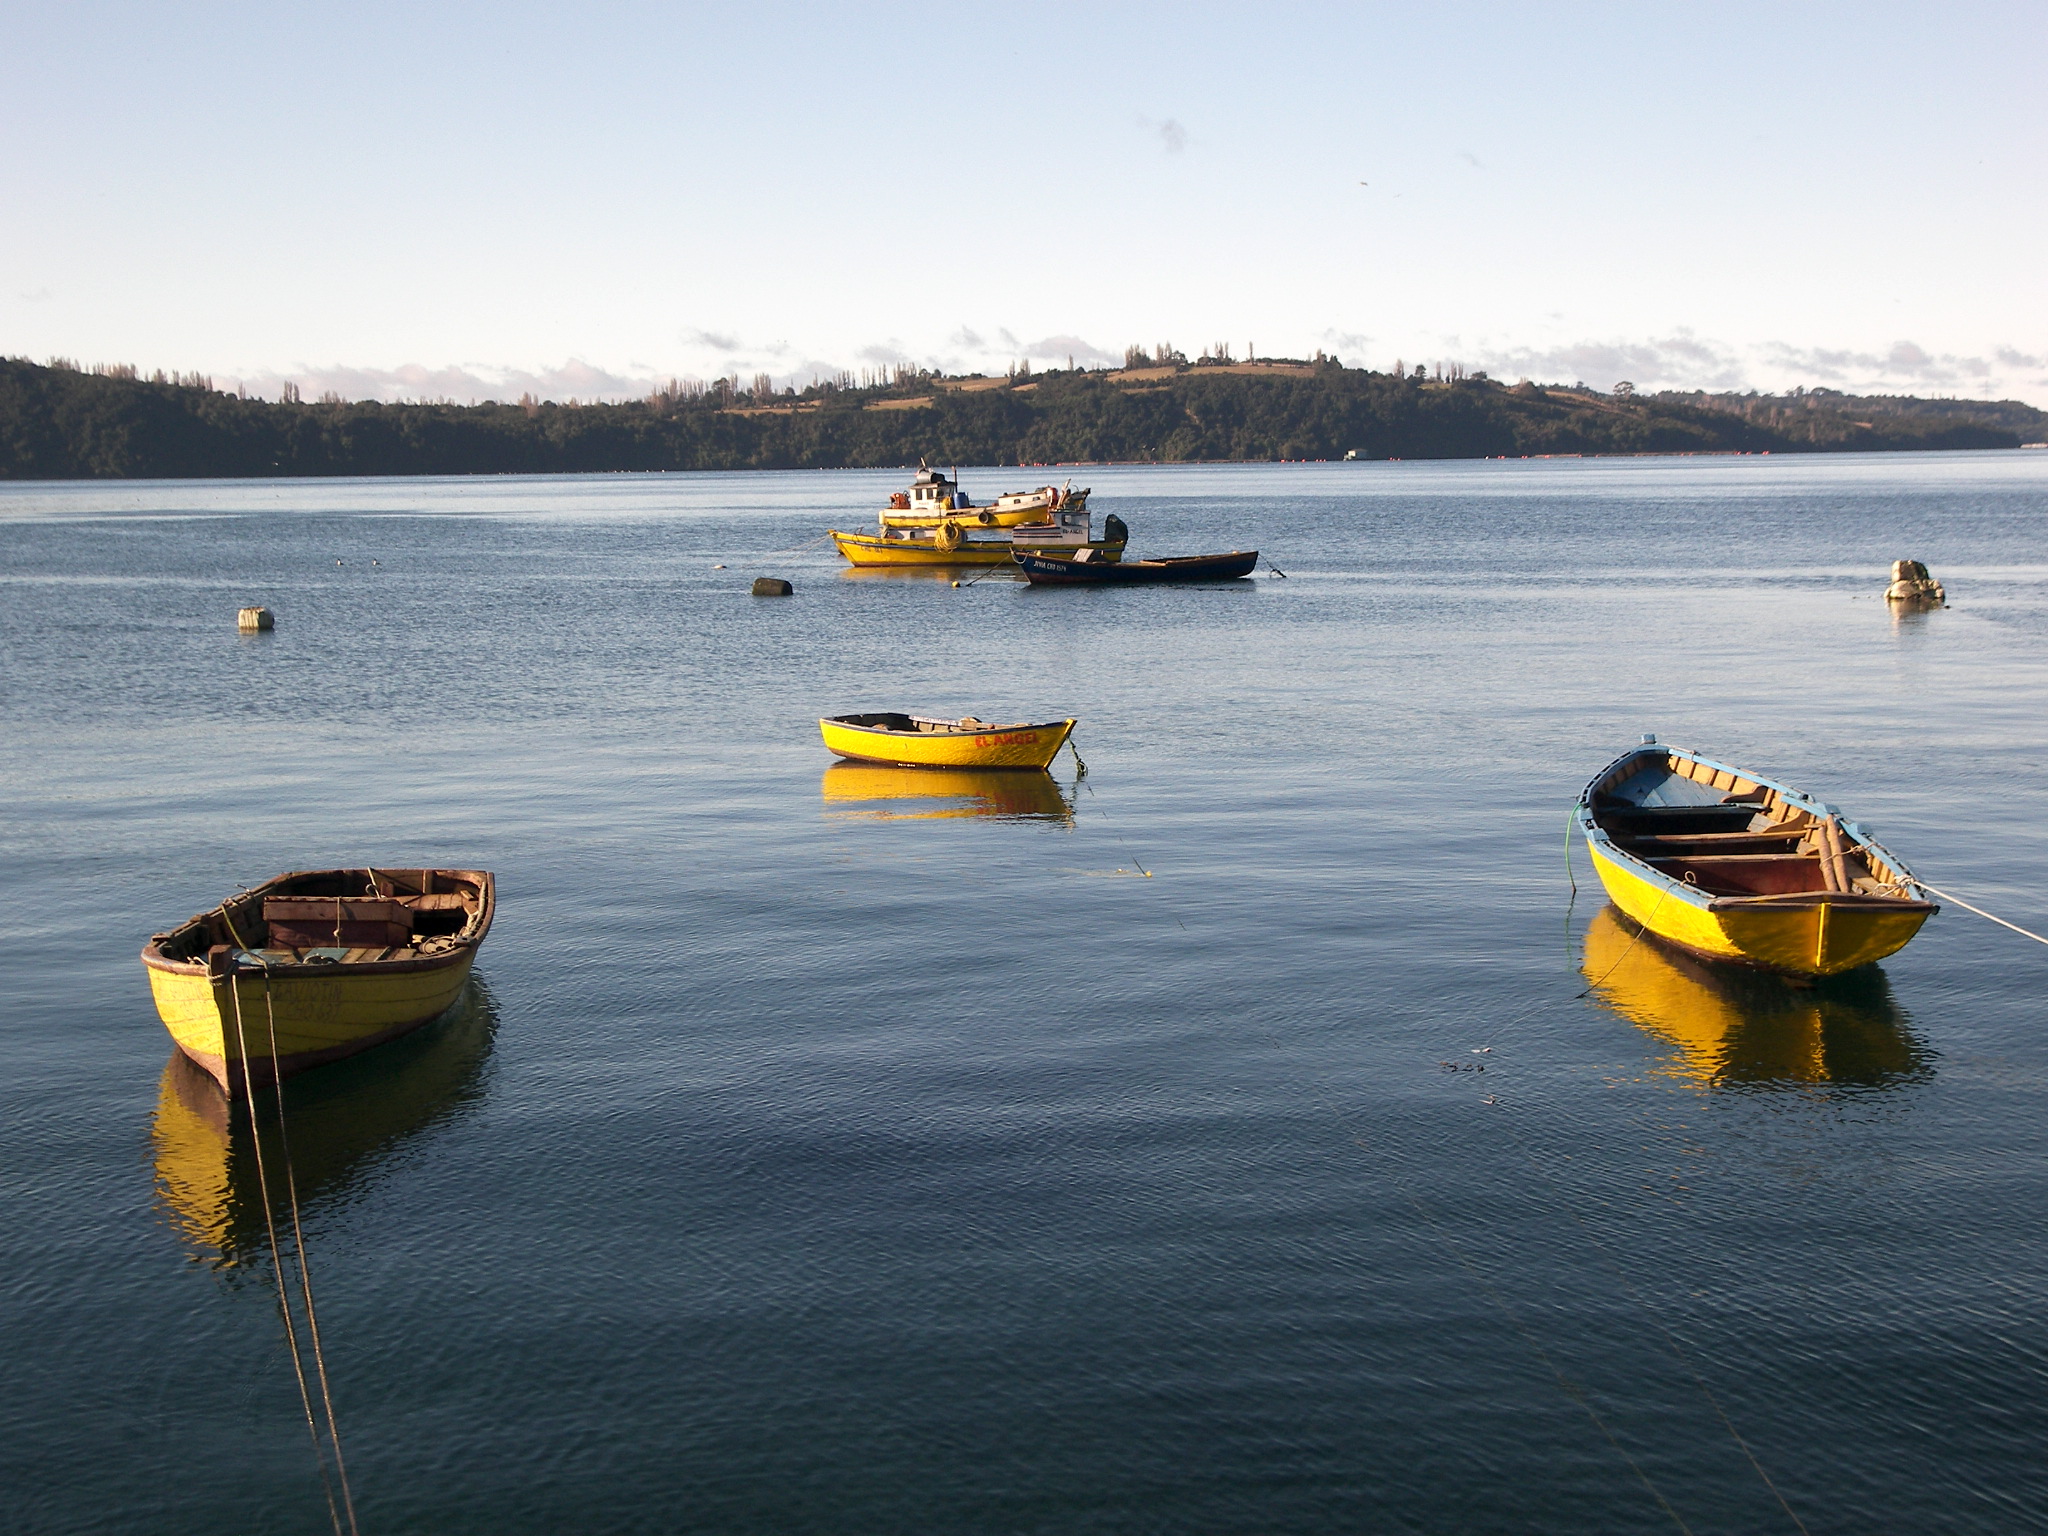 Chiloe, photo by Jeff Warren, Flickr, CC BY-SA 2.0